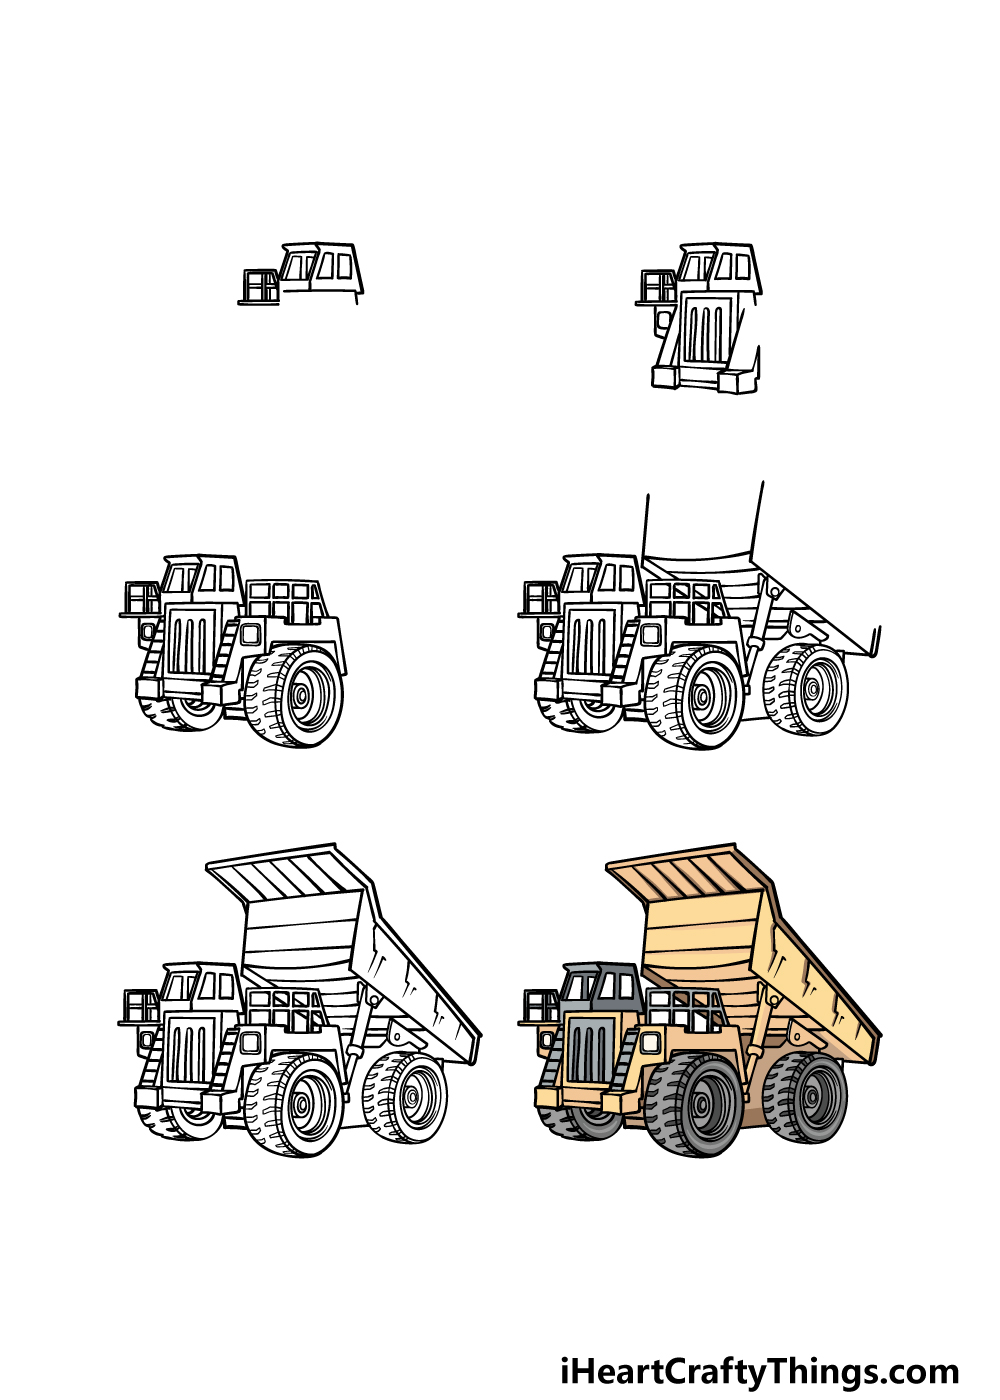 how to draw a Dump Truck in 6 steps